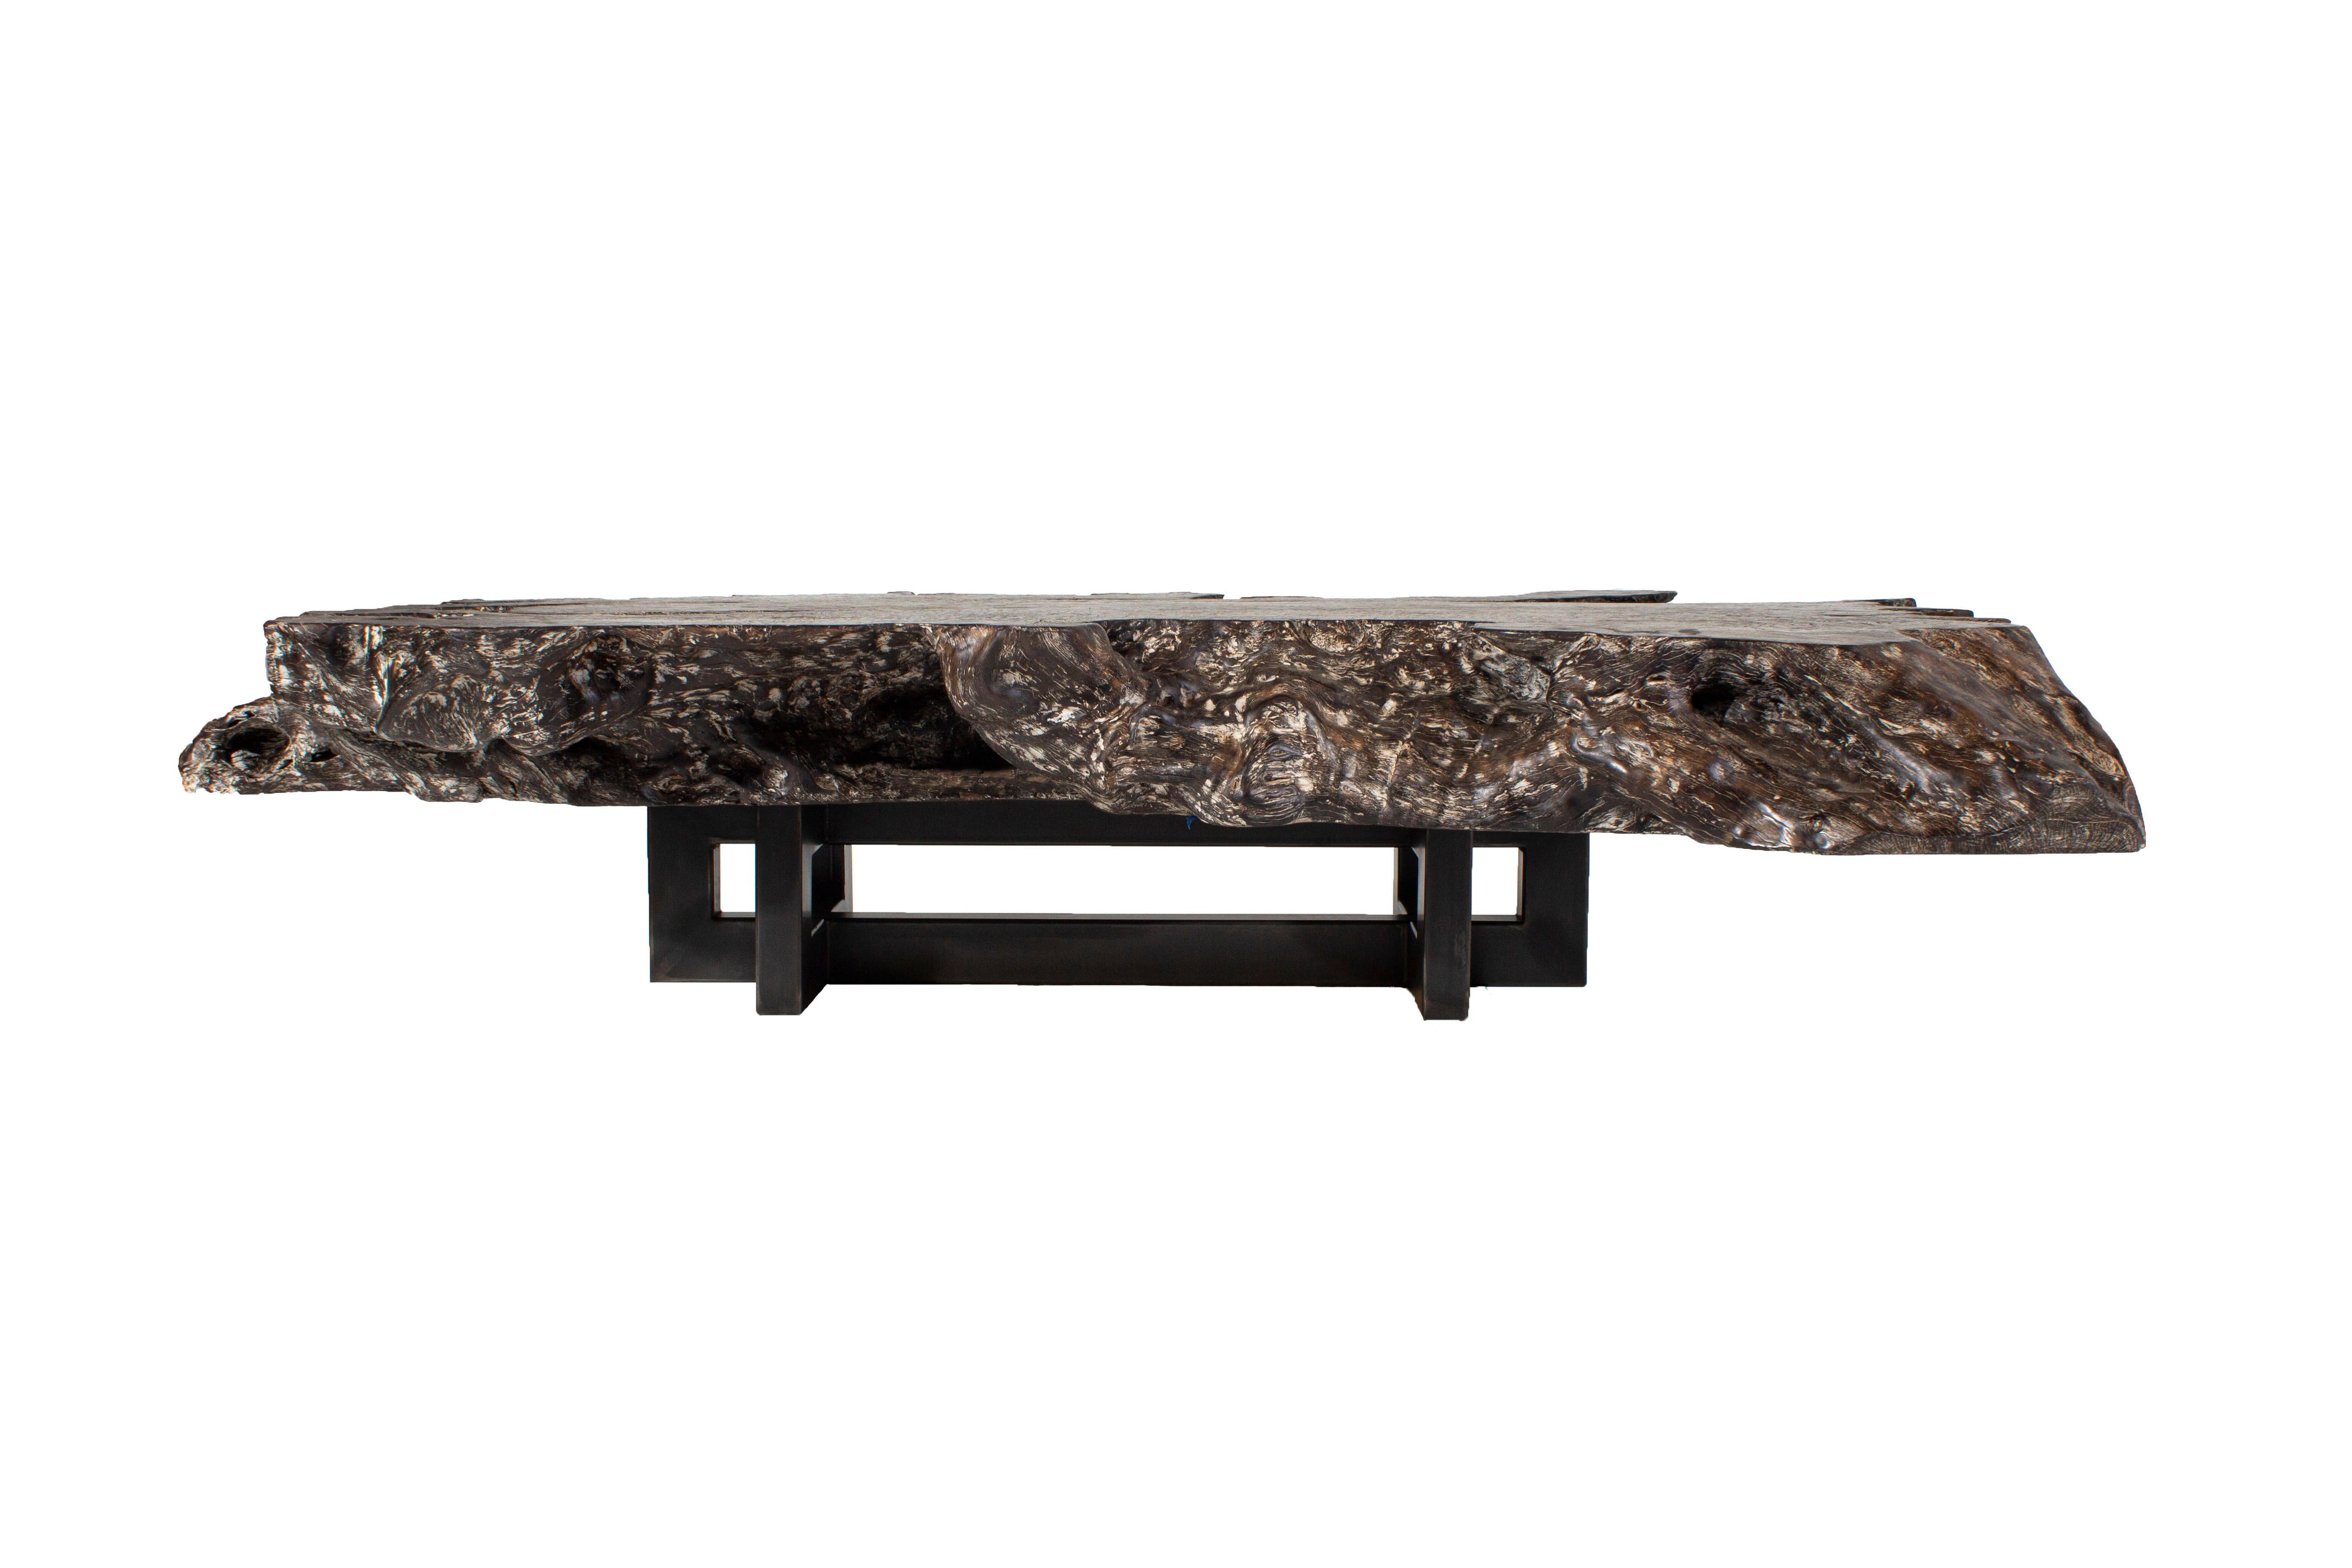 Gray toned bleached organic form Lyche wood coffee table.

One of a kind from Belgium.